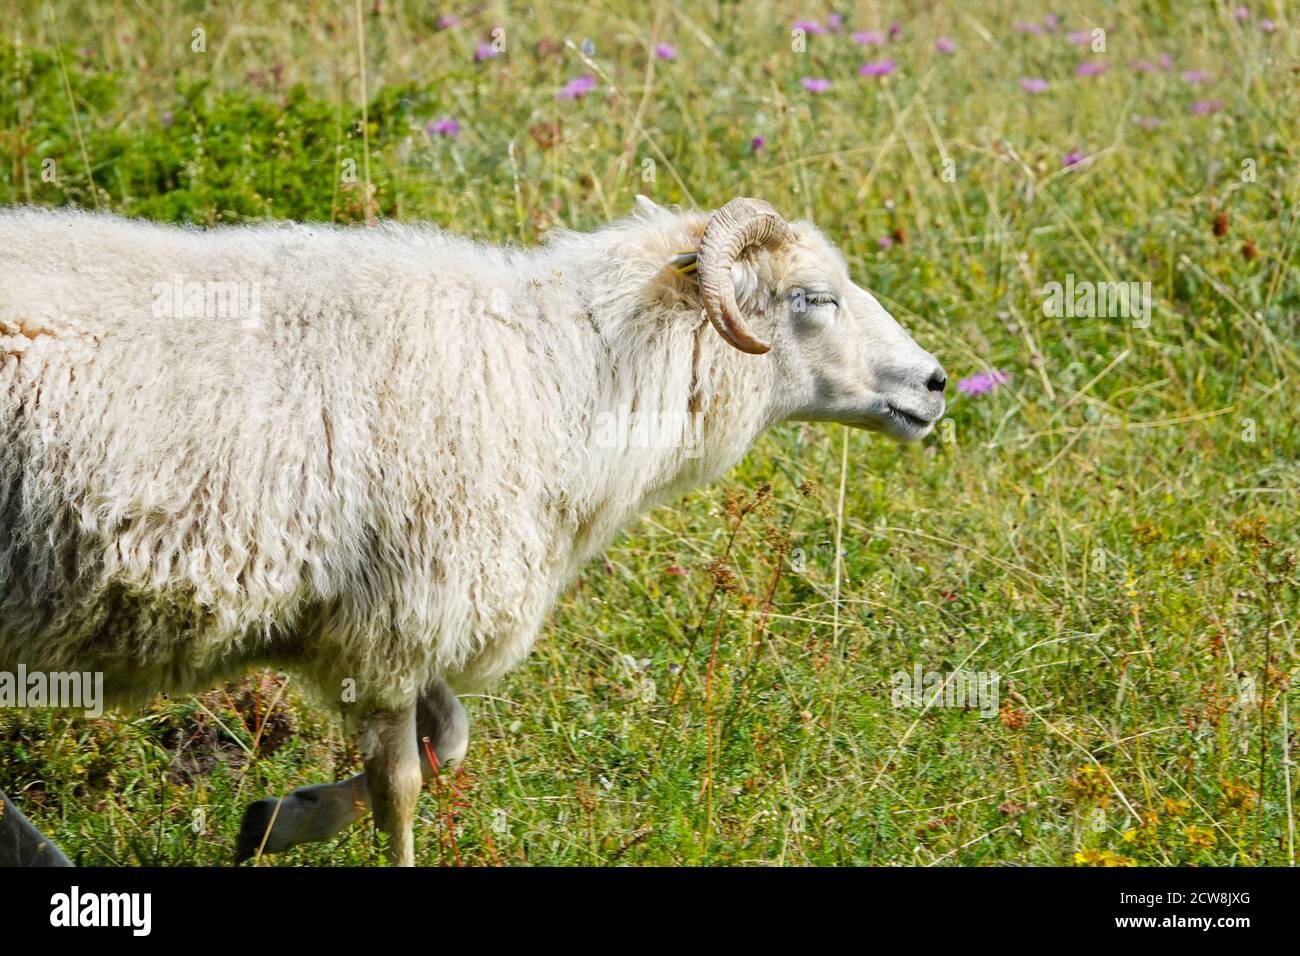 Wild animals with broken horns- sheep portrait. Farmland View of a running Woolly Sheep in a Green Field Stock Photo